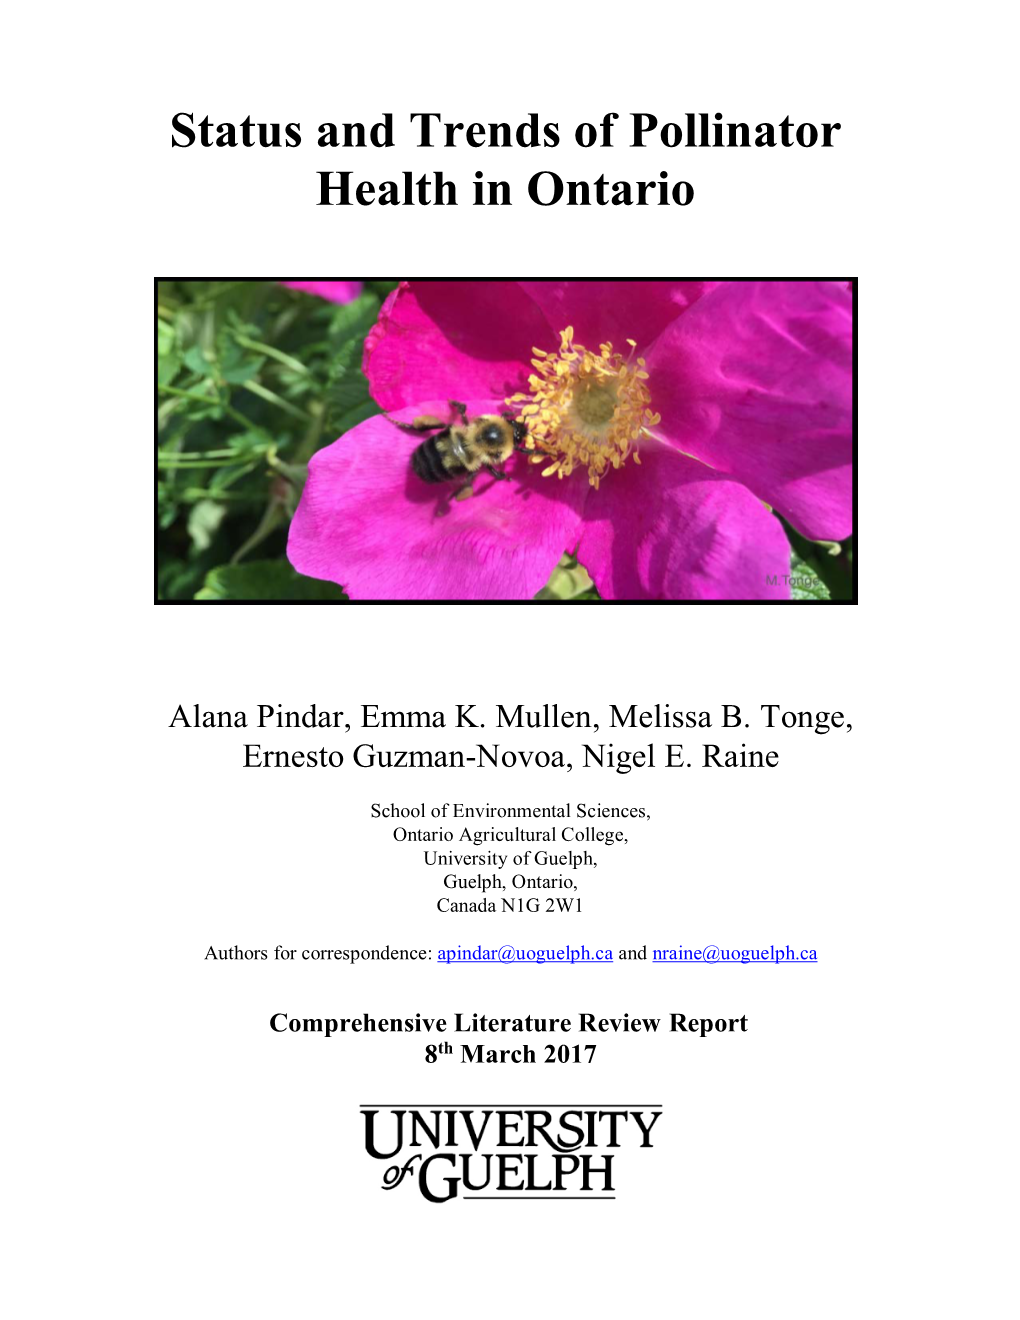 Status and Trends of Pollinator Health in Ontario